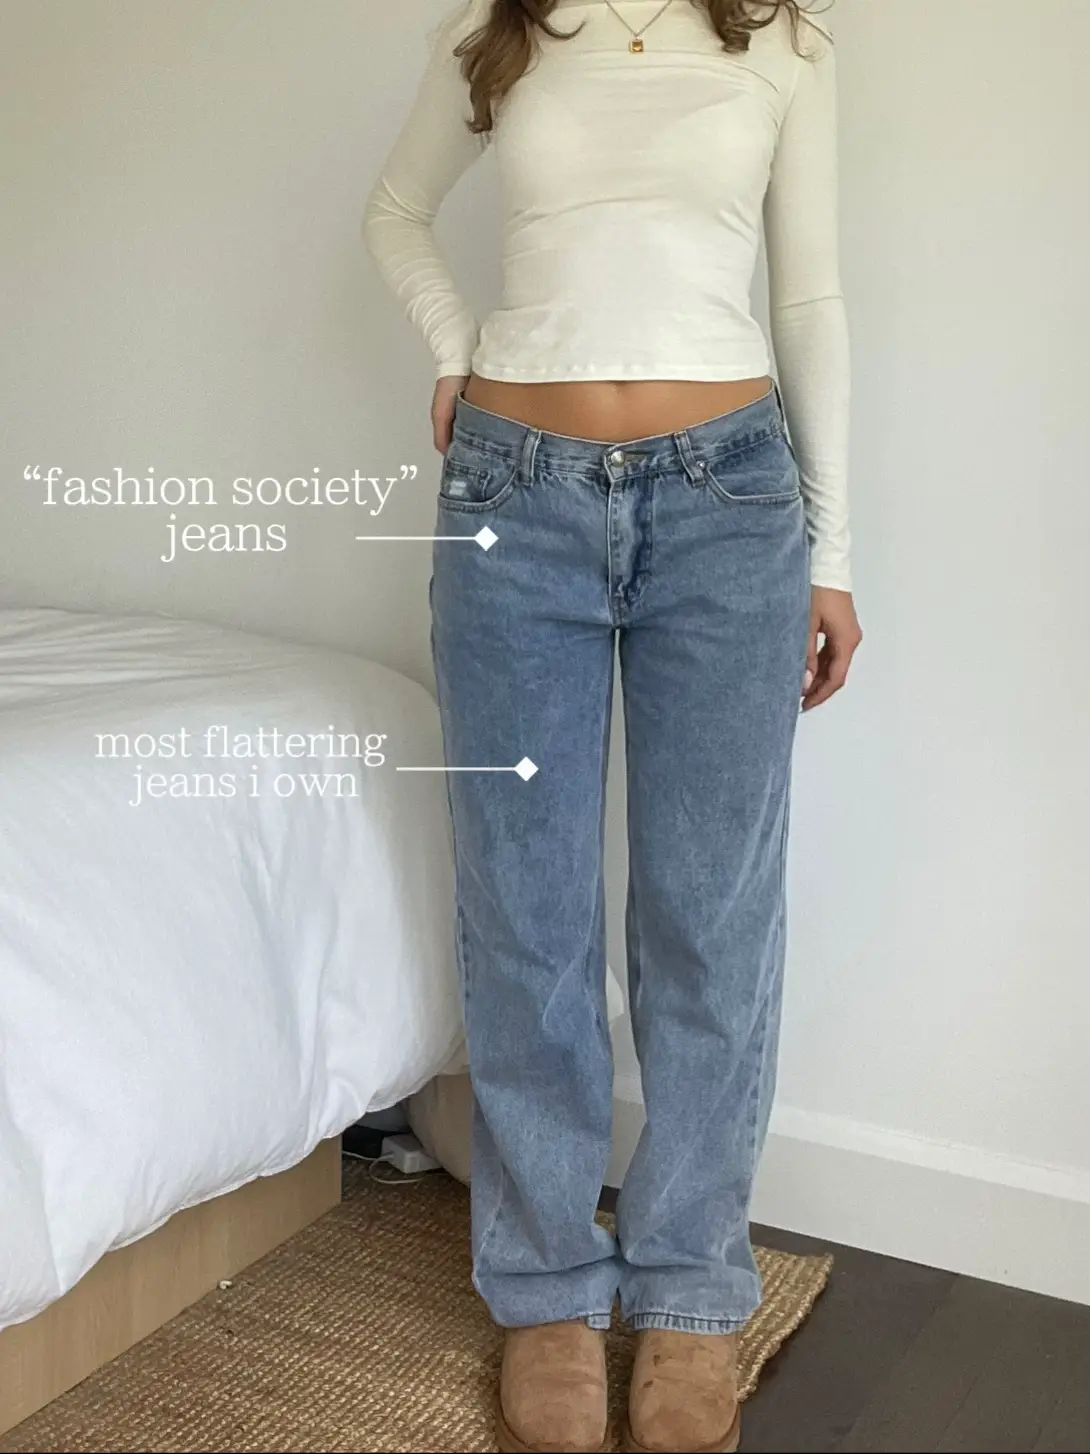 I tried the €29.95 Zara cargos, they're so comfortable - here's how I  styled them